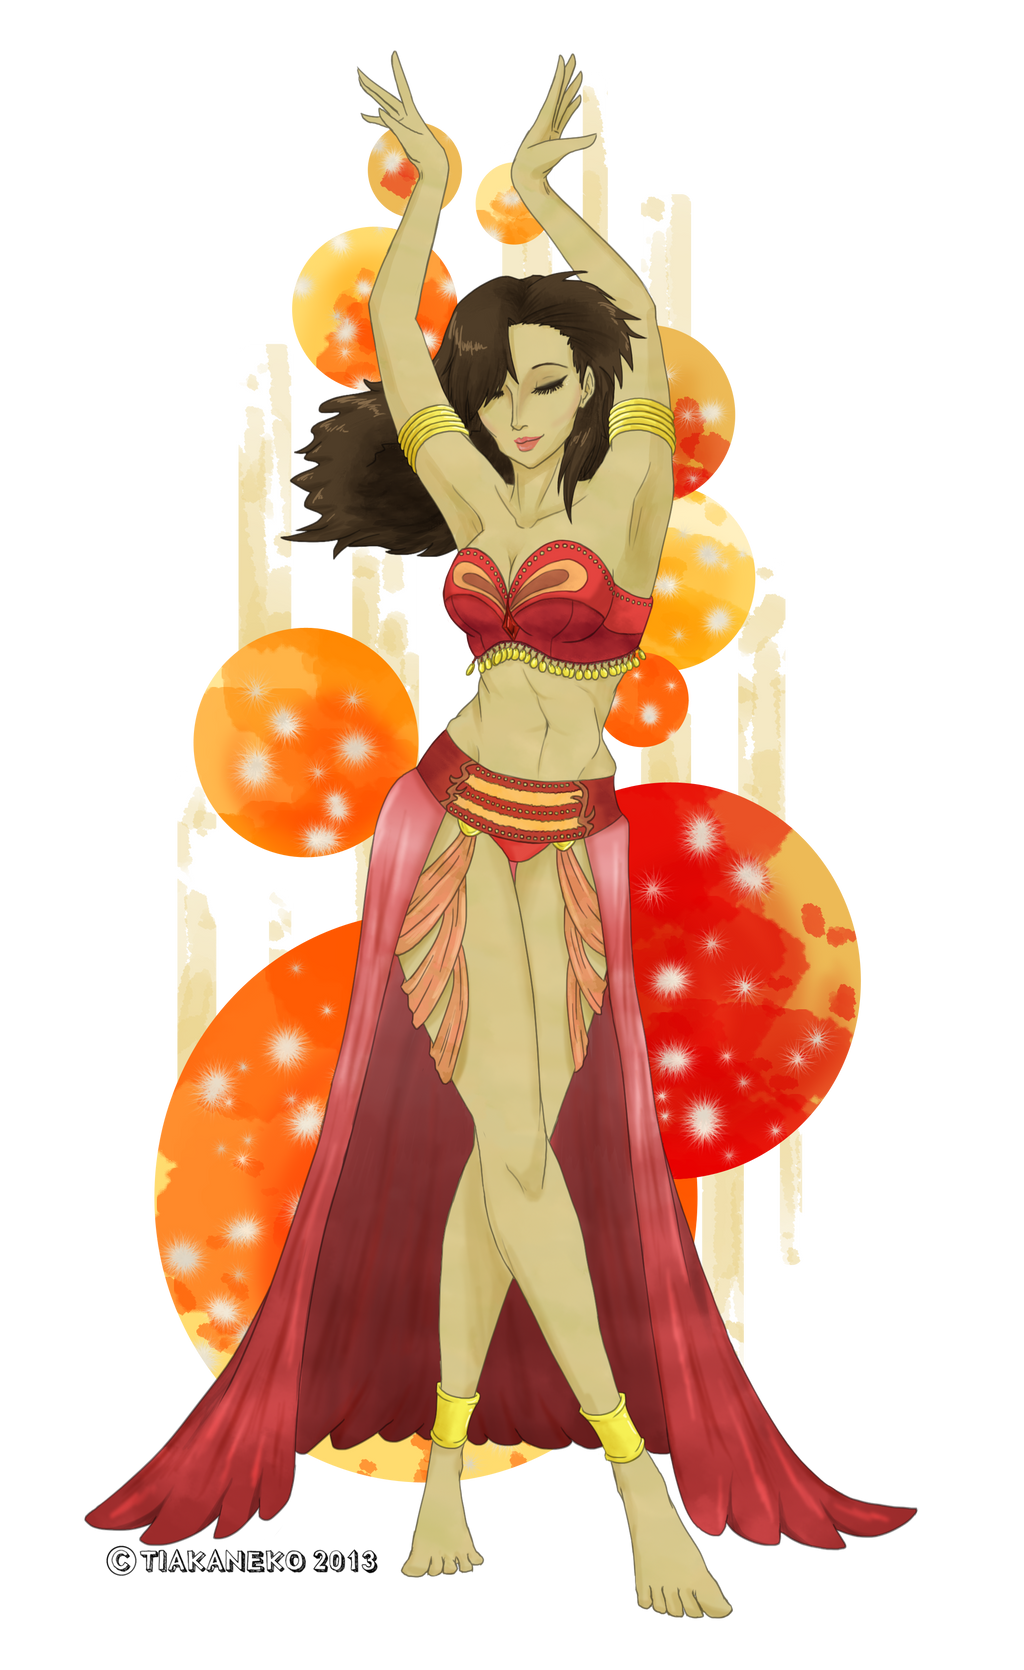 belly dance clipart - photo #44